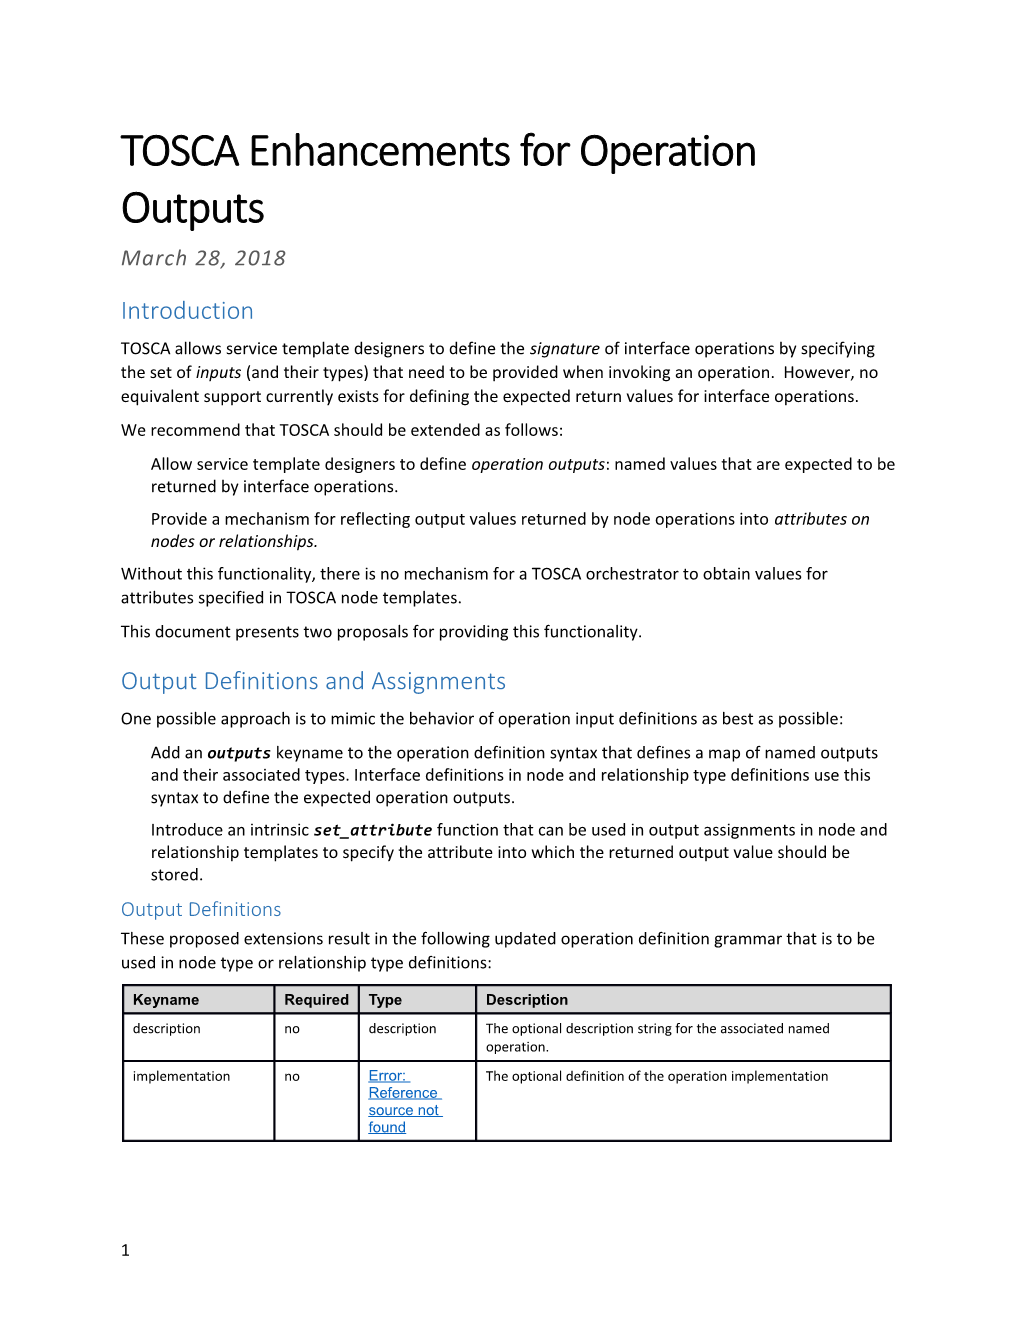 TOSCA Enhancements for Operation Outputs